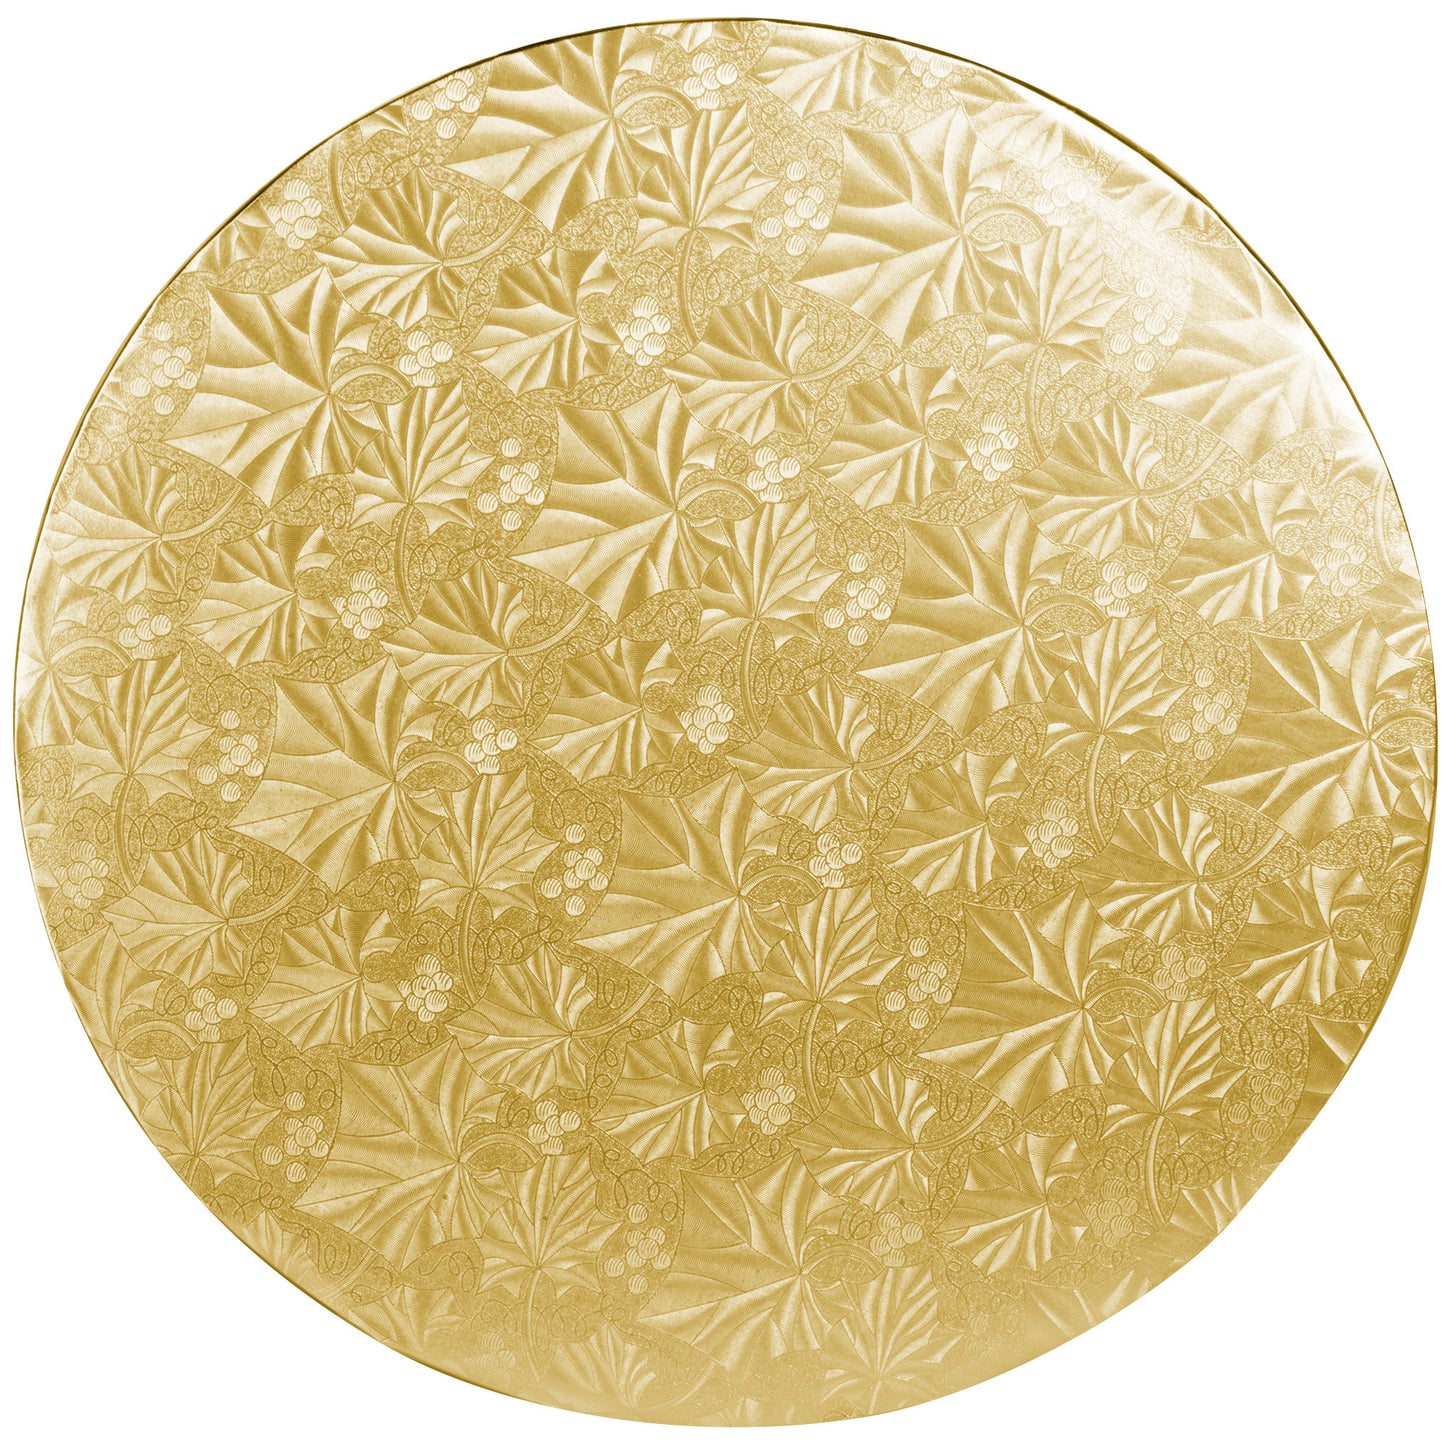 image of 10 inch round gold cake drum that is 1/2 inch thick